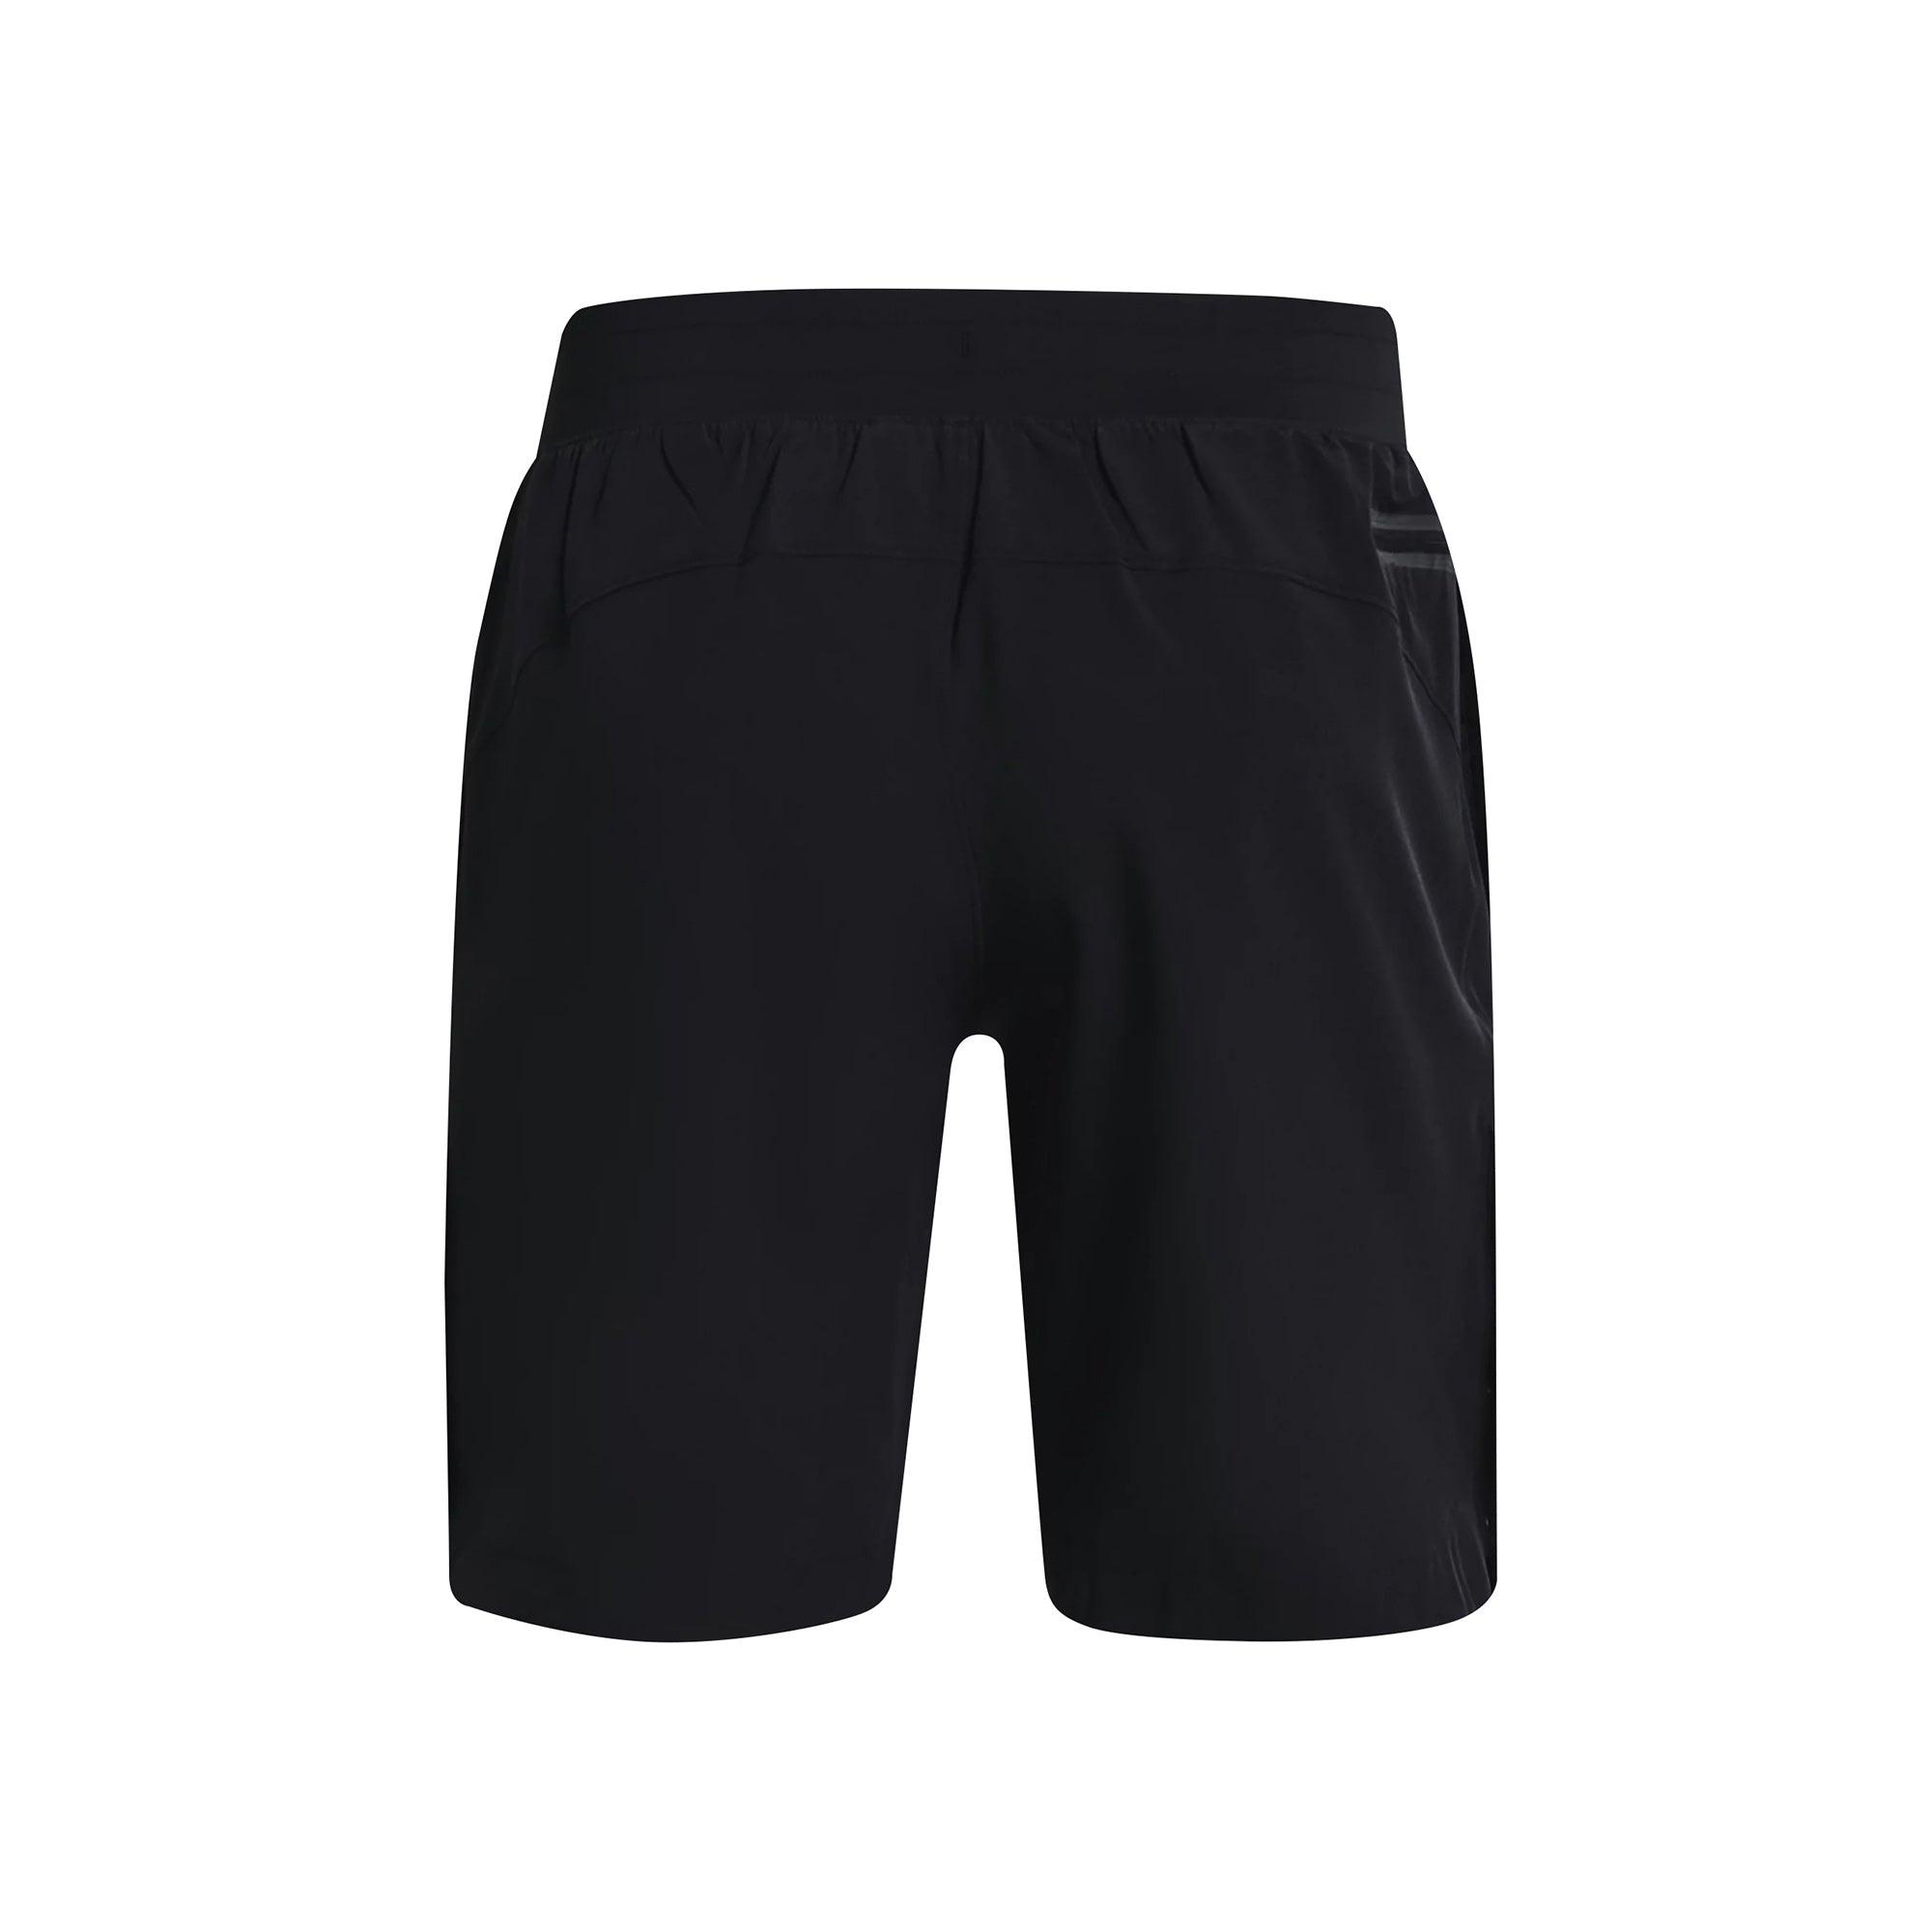 Quần ngắn thể thao nam Under Armour Project Rock Snap - 1361616-001